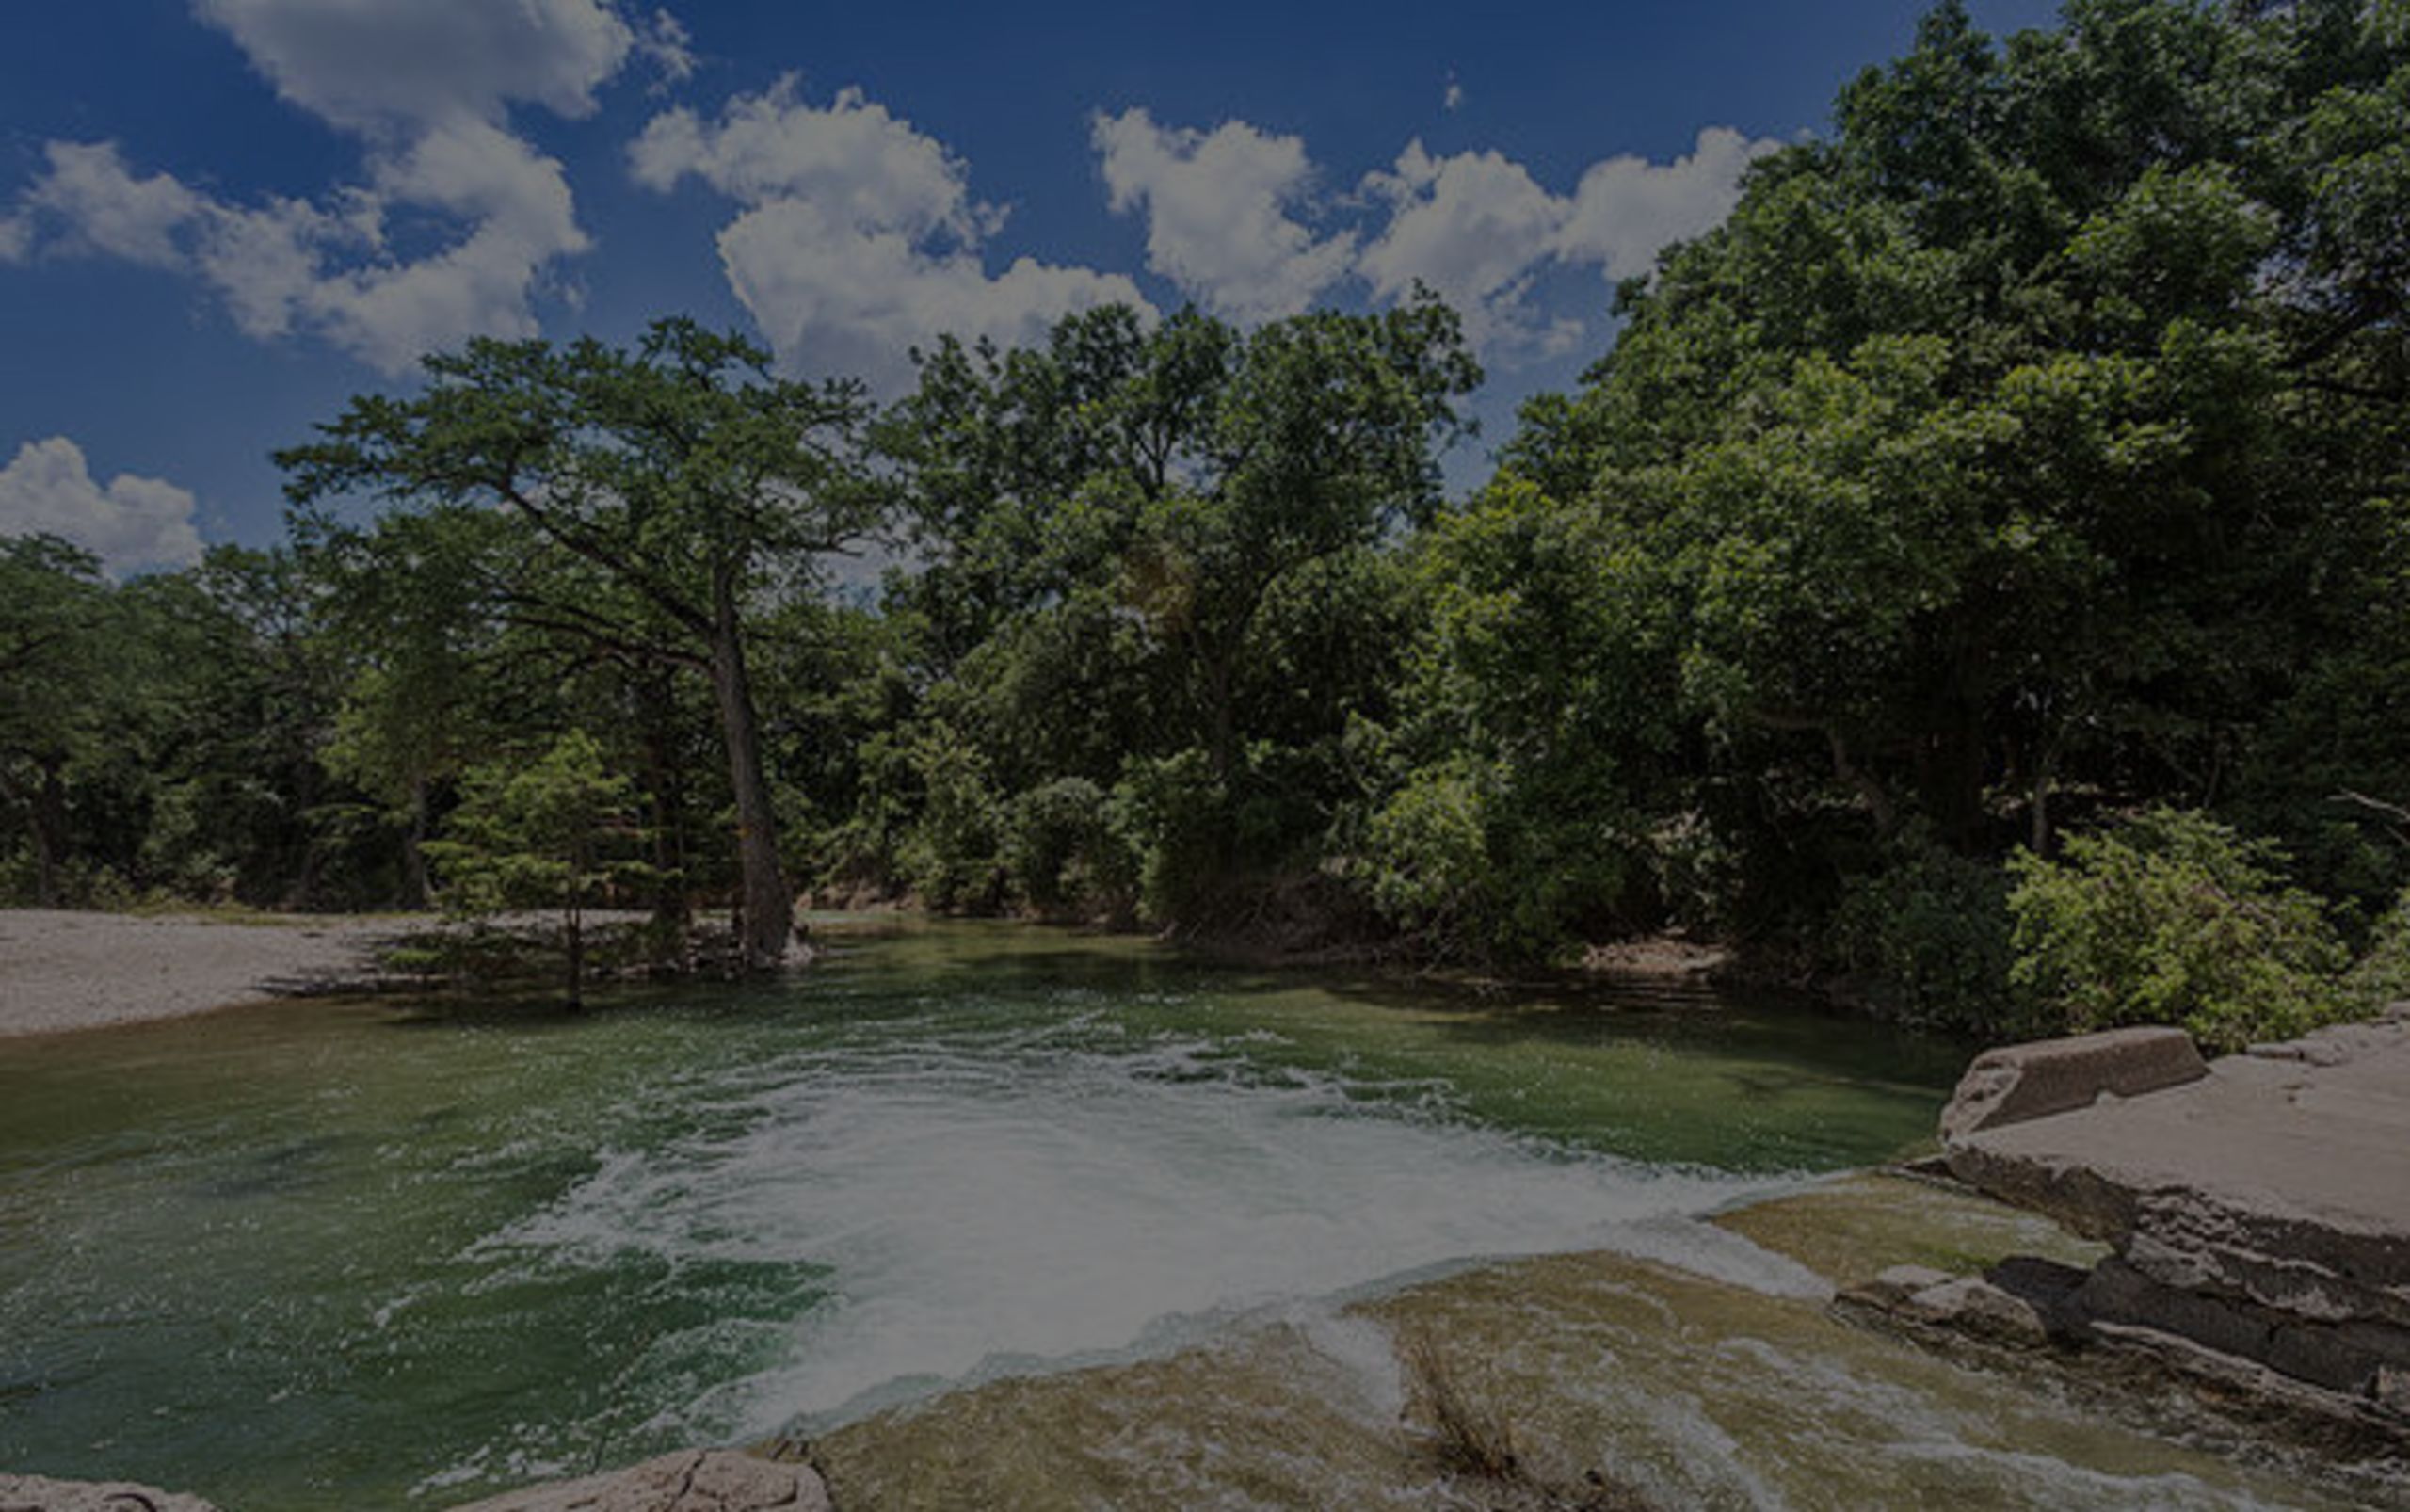 Off-MLS: +/- 6 Acre waterfront business, redevelopment opportunity 20 minutes to downtown Austin